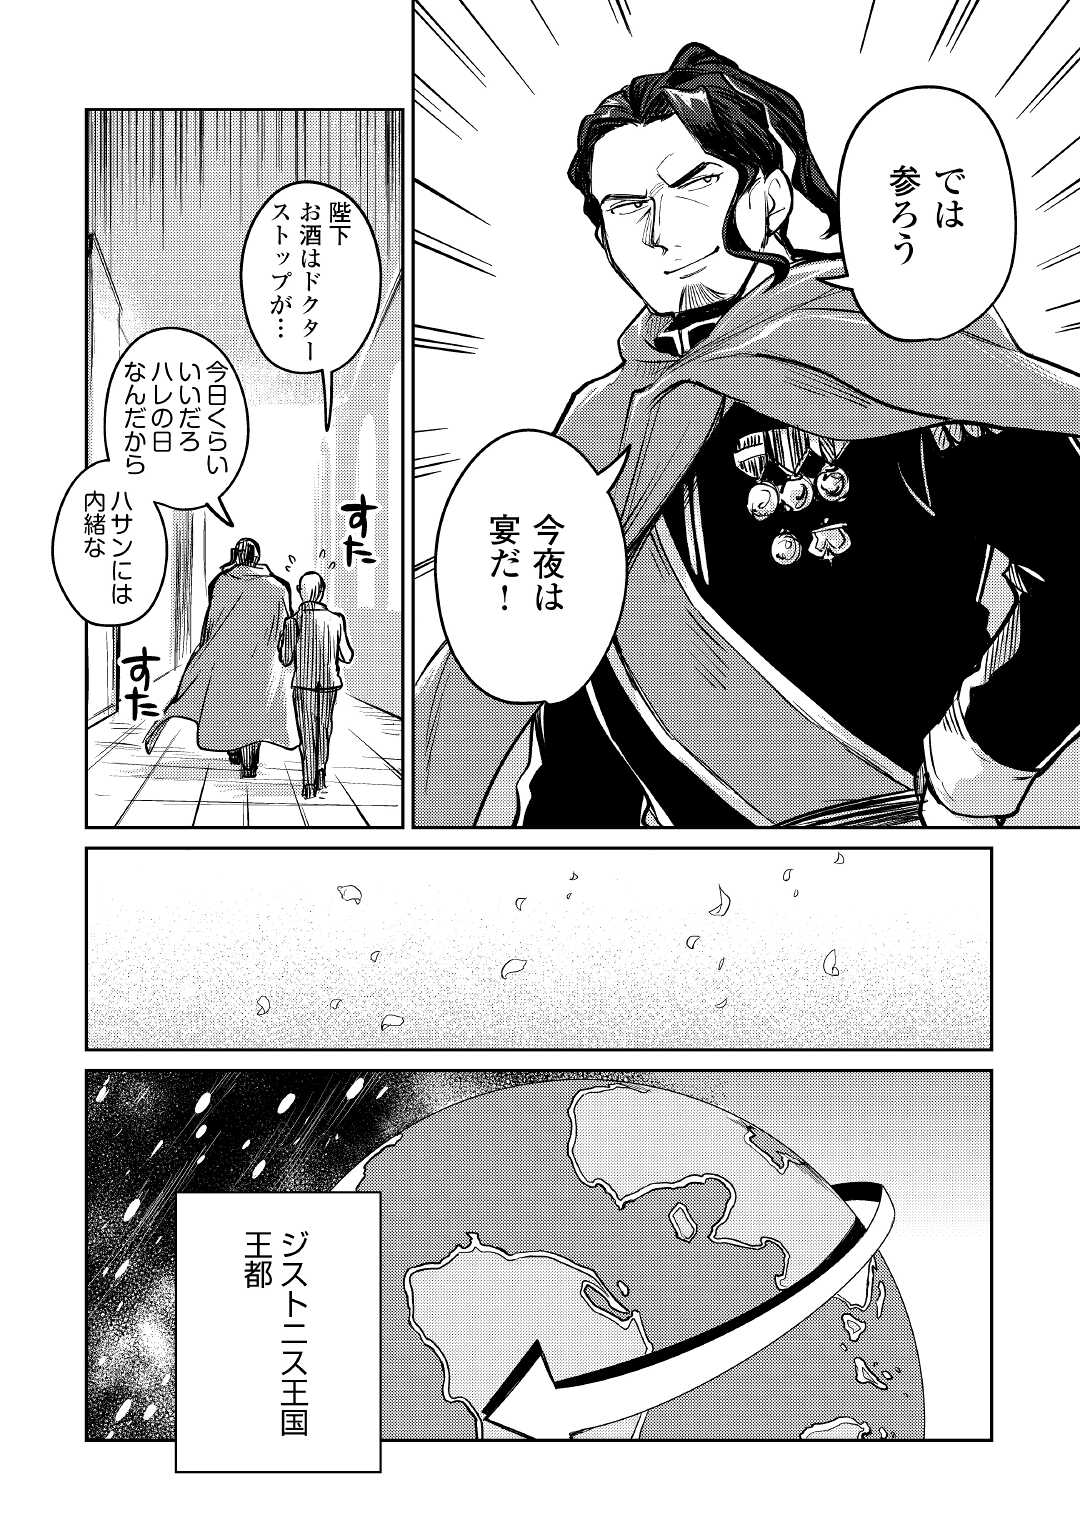 The Former Structural Researcher’s Story of Otherworldly Adventure 第36話 - Page 20